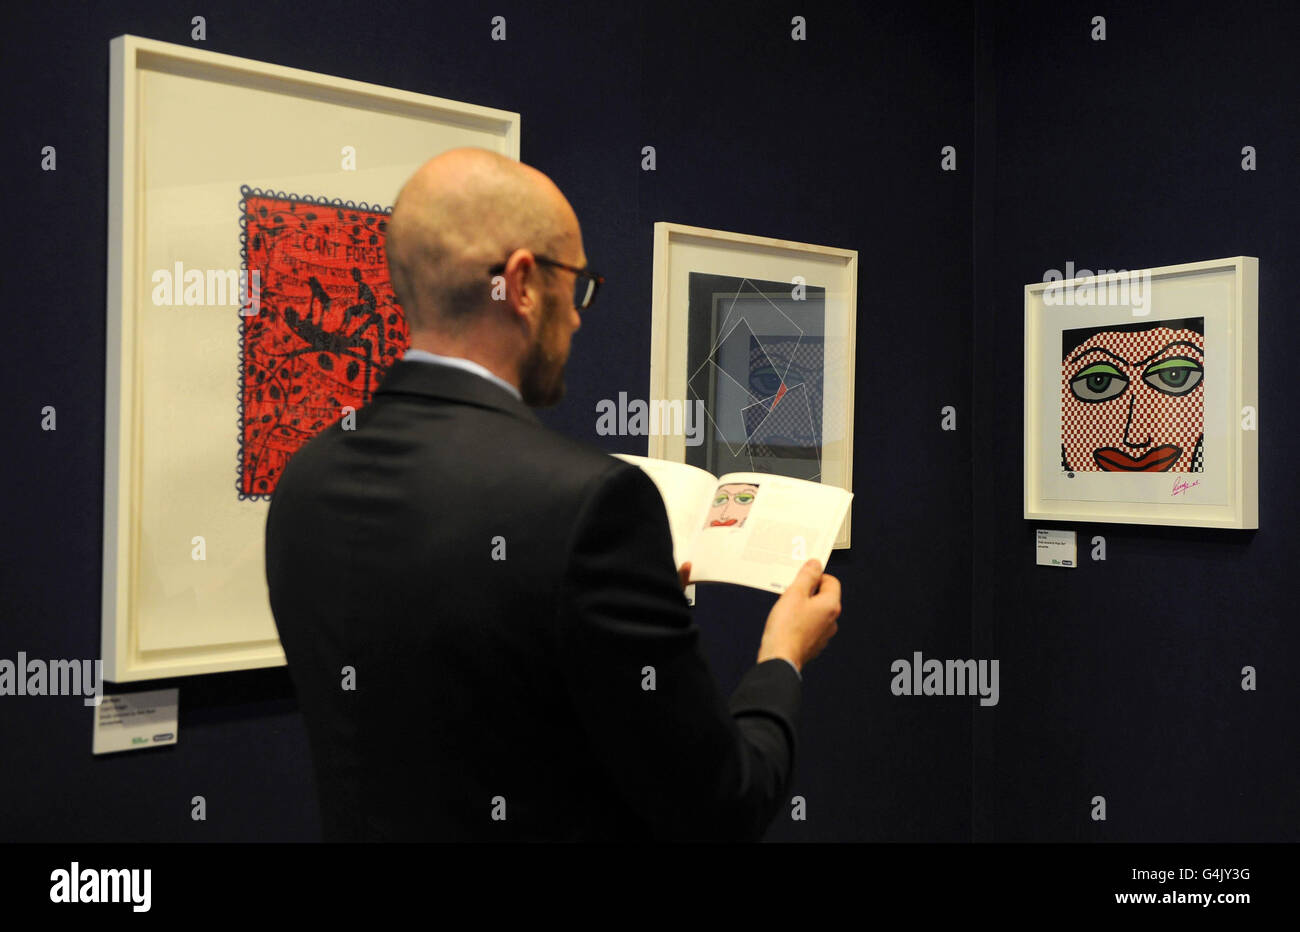 Bonhams senior specialist in contemporary art Alan Montgomery, looks at number of art works including Ringo Starr's 'Oky Doky', which are to be auctioned at Bonhams for Macmillan De'Longhi art auction in aid of Macmillan Cancer Support tomorrow. Stock Photo